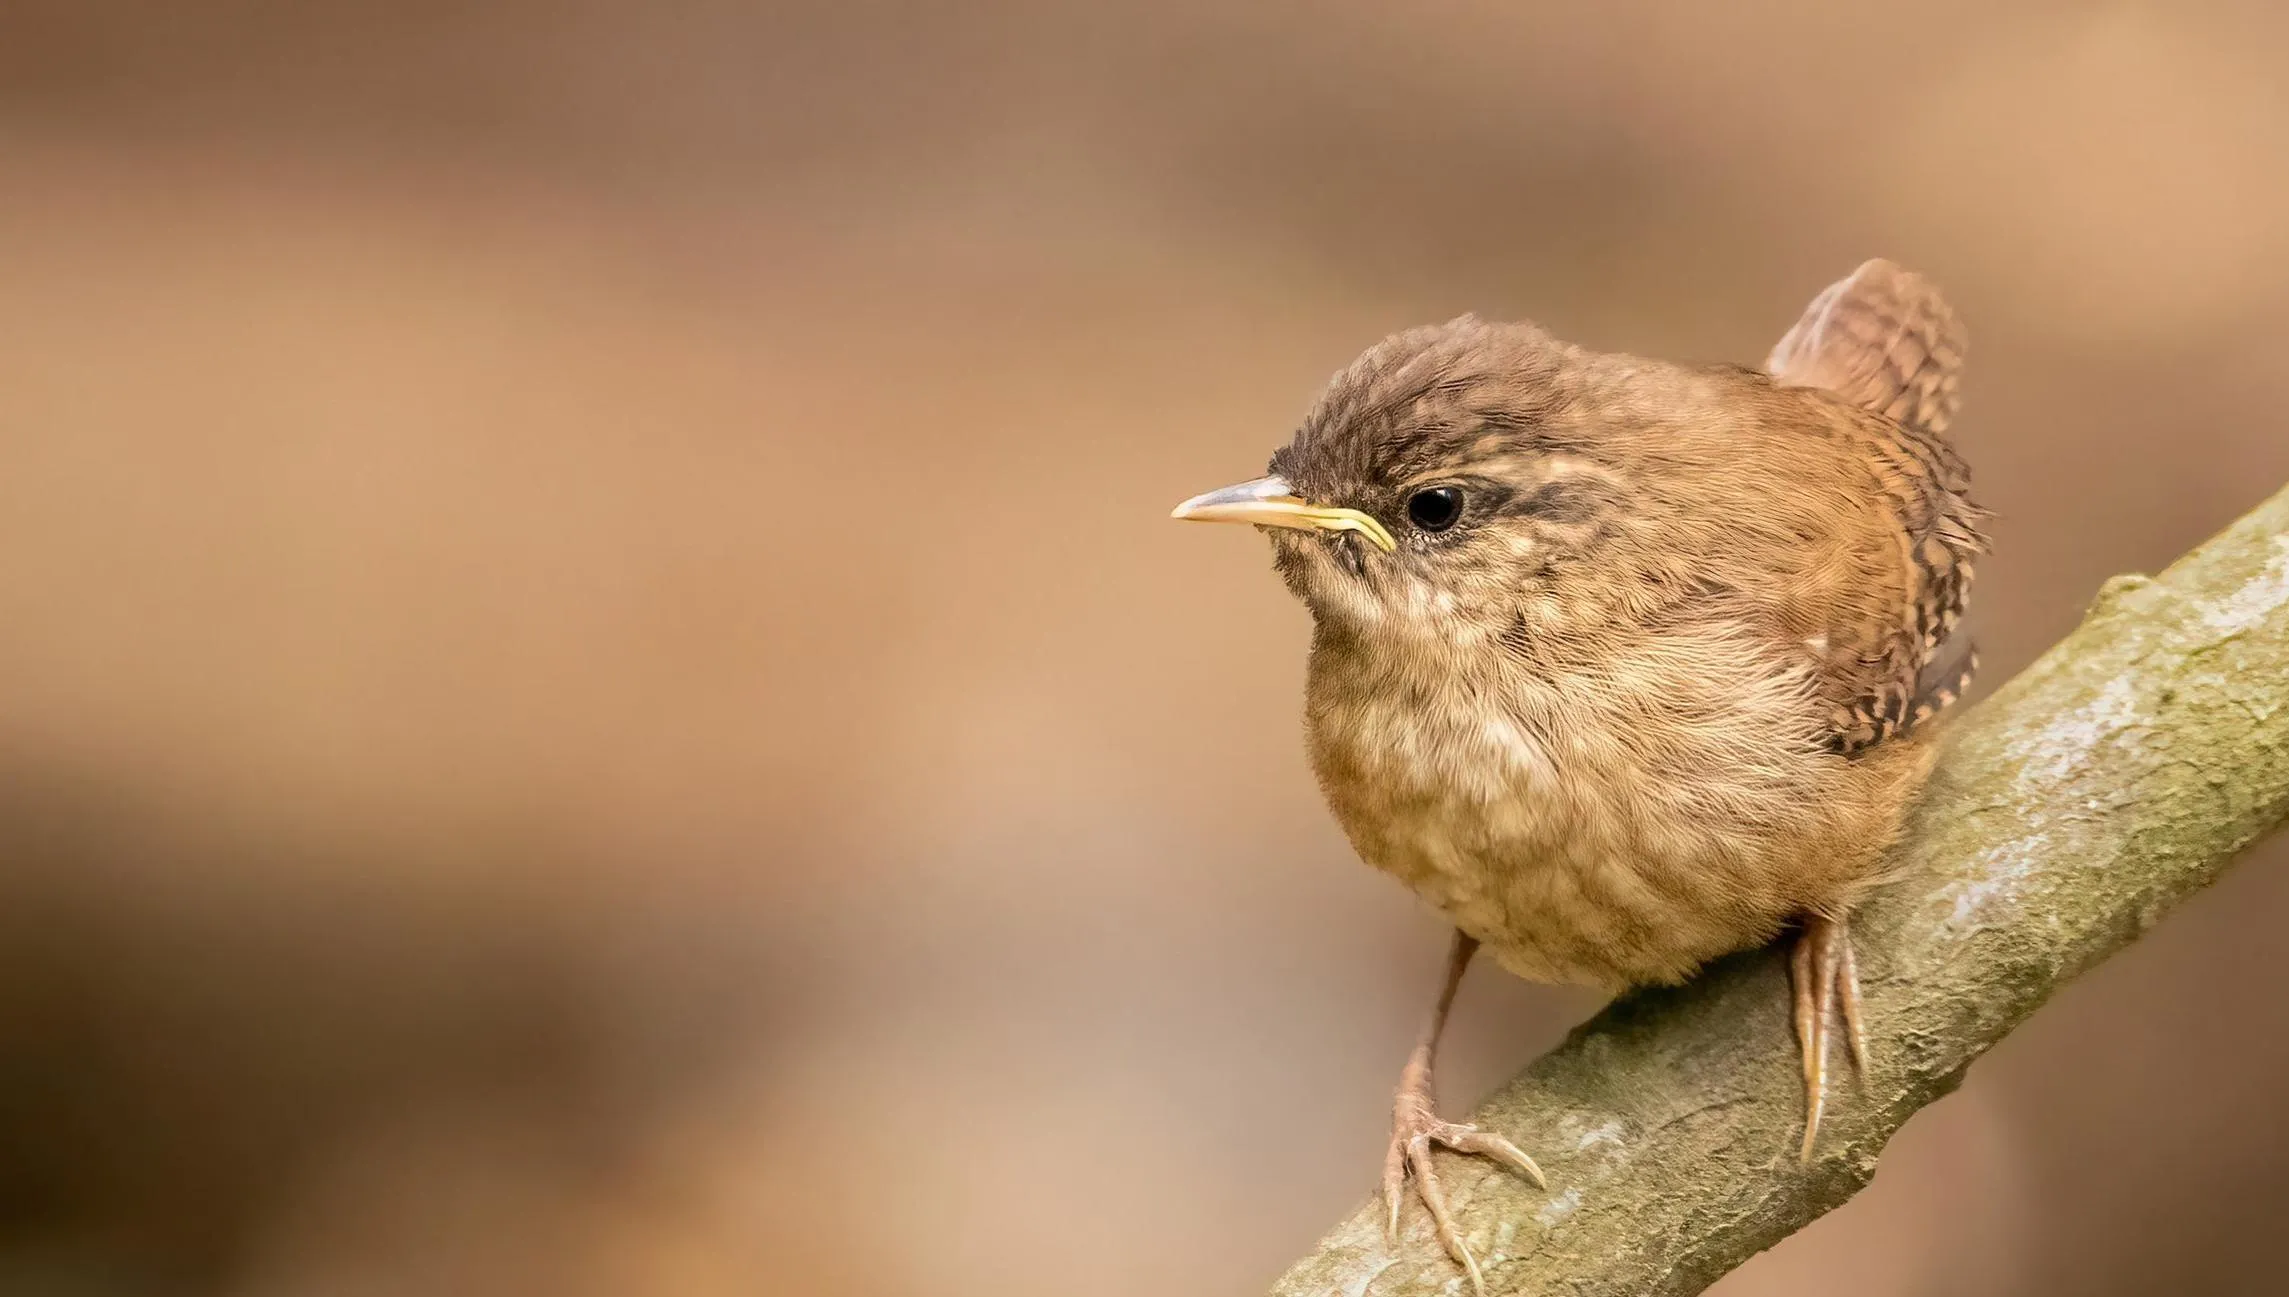 A lone Juvenile Wren perched on a branch.